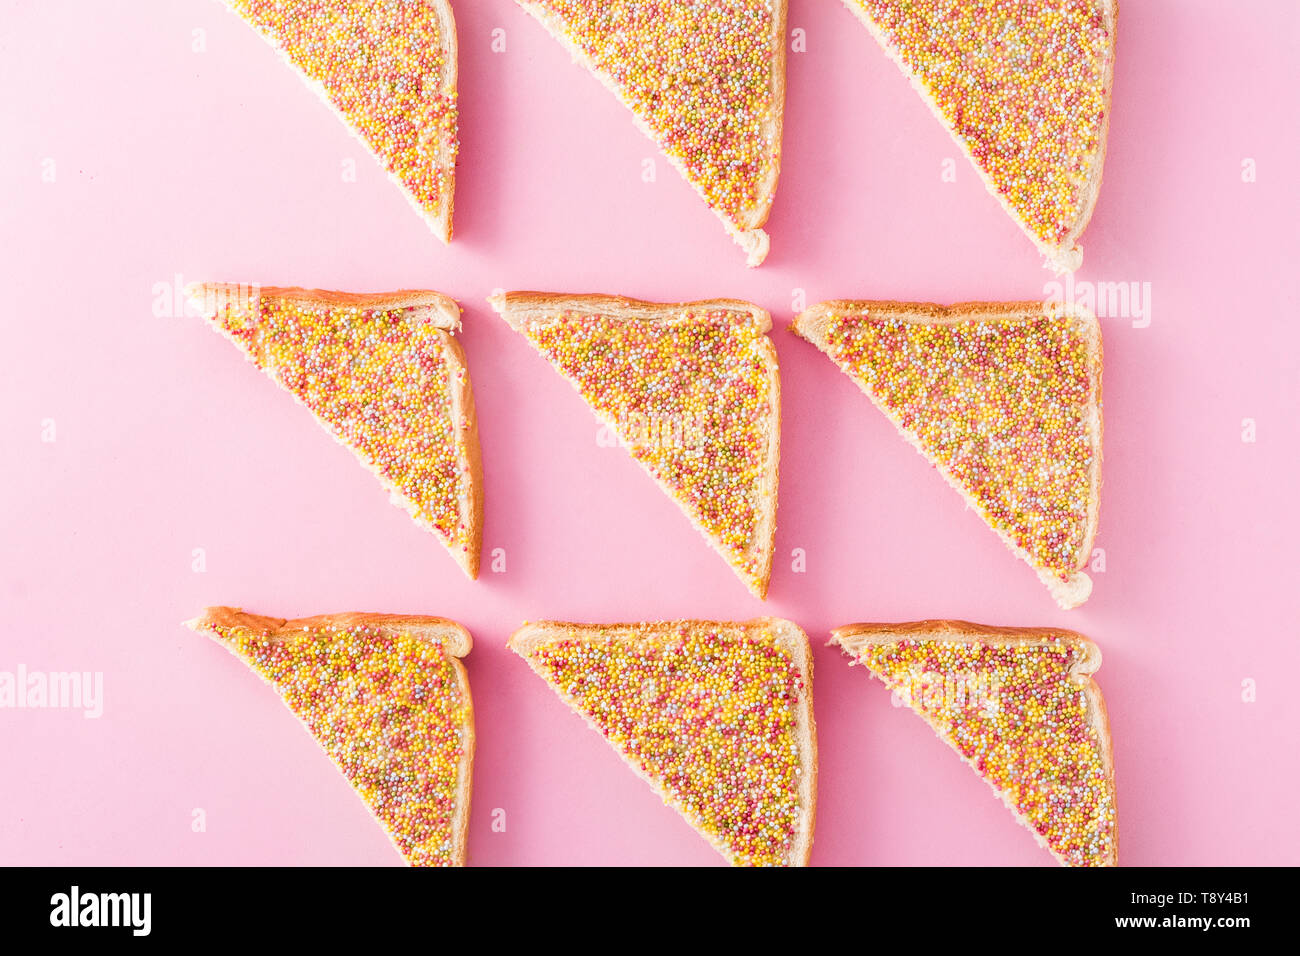 Traditional Australian fairy bread pattern on pink background Stock Photo